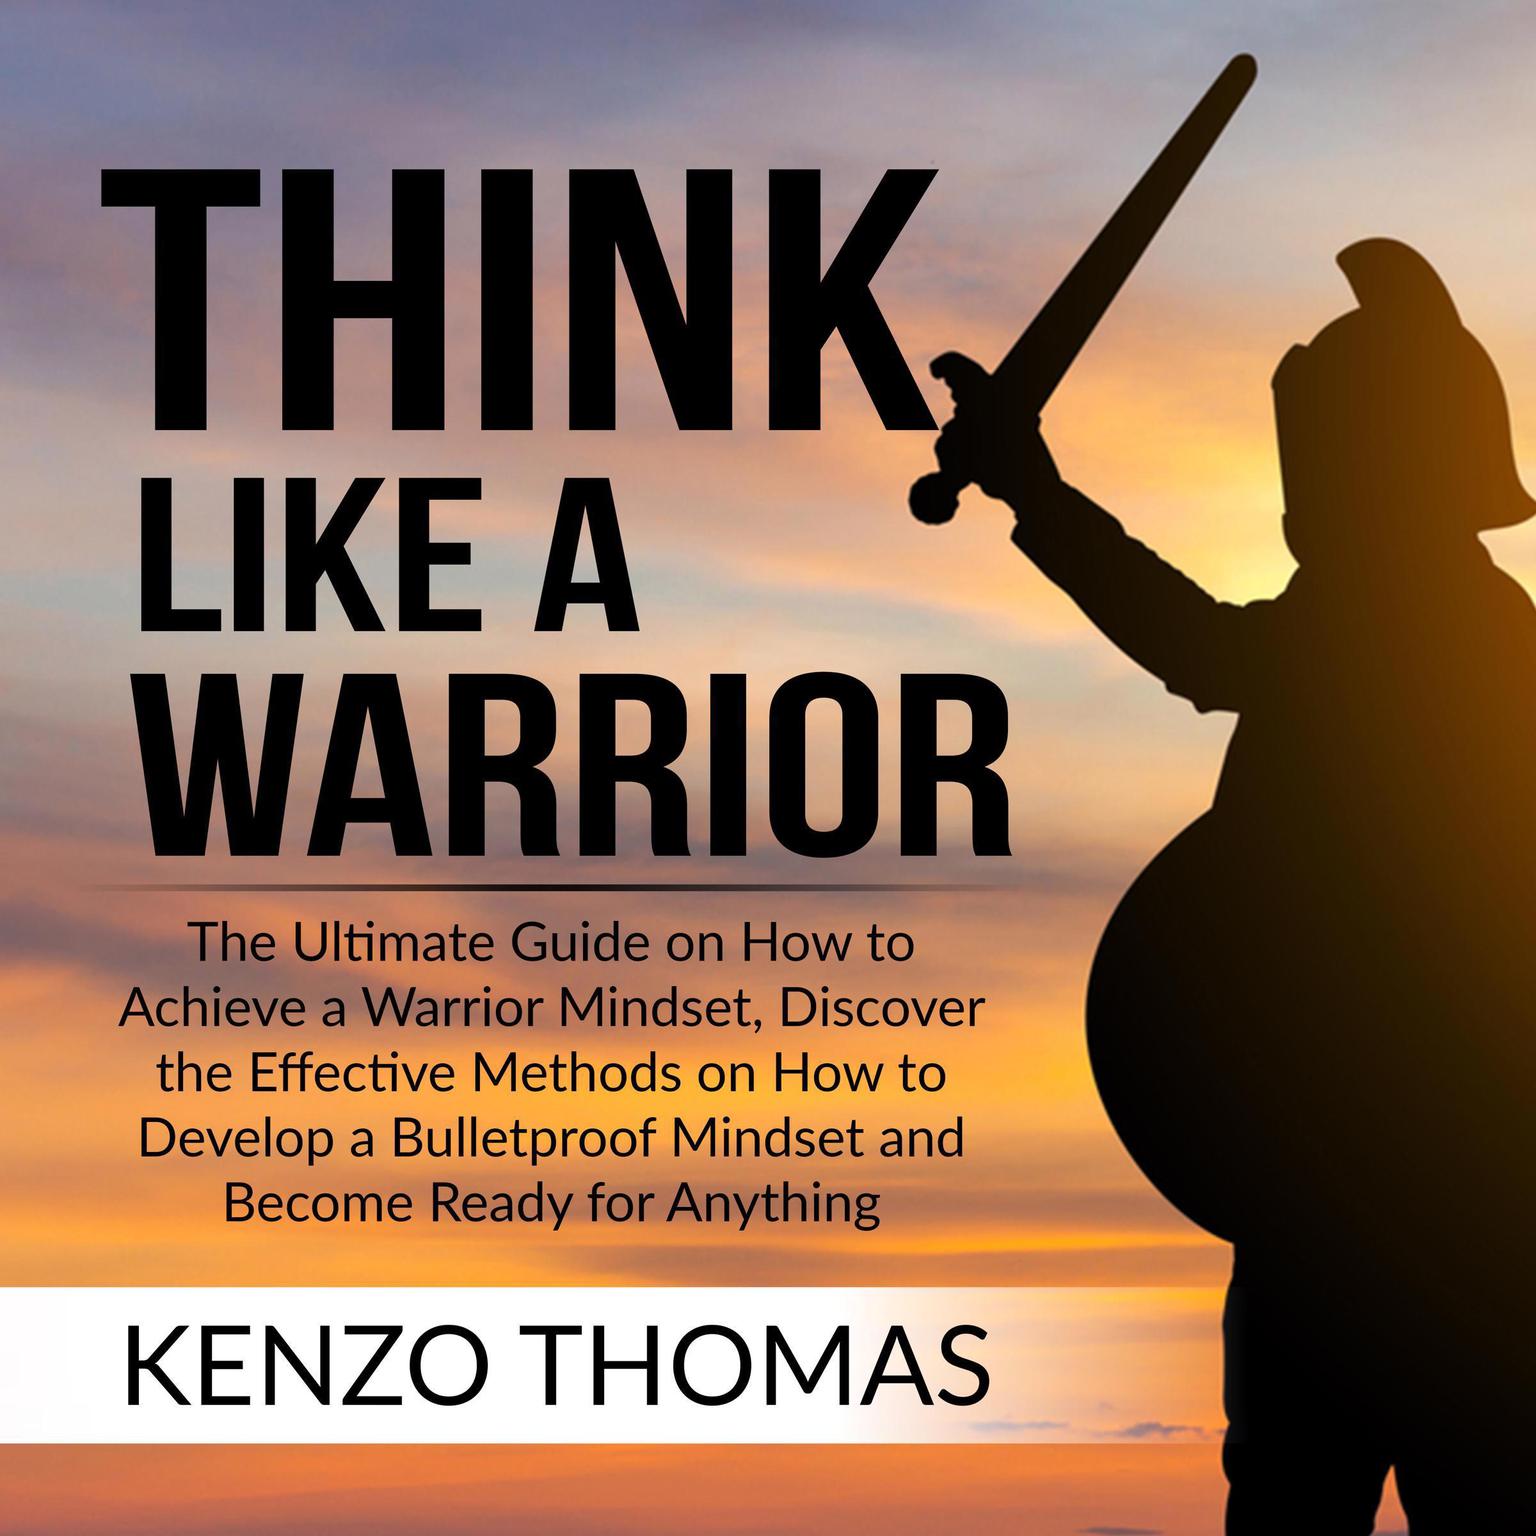 Think Like a Warrior: The Ultimate Guide on How to Achieve a Warrior Mindset, Discover the Effective Methods on How to Develop a Bulletproof Mindset and Become Ready for Anything  Audiobook, by Kenzo Thomas